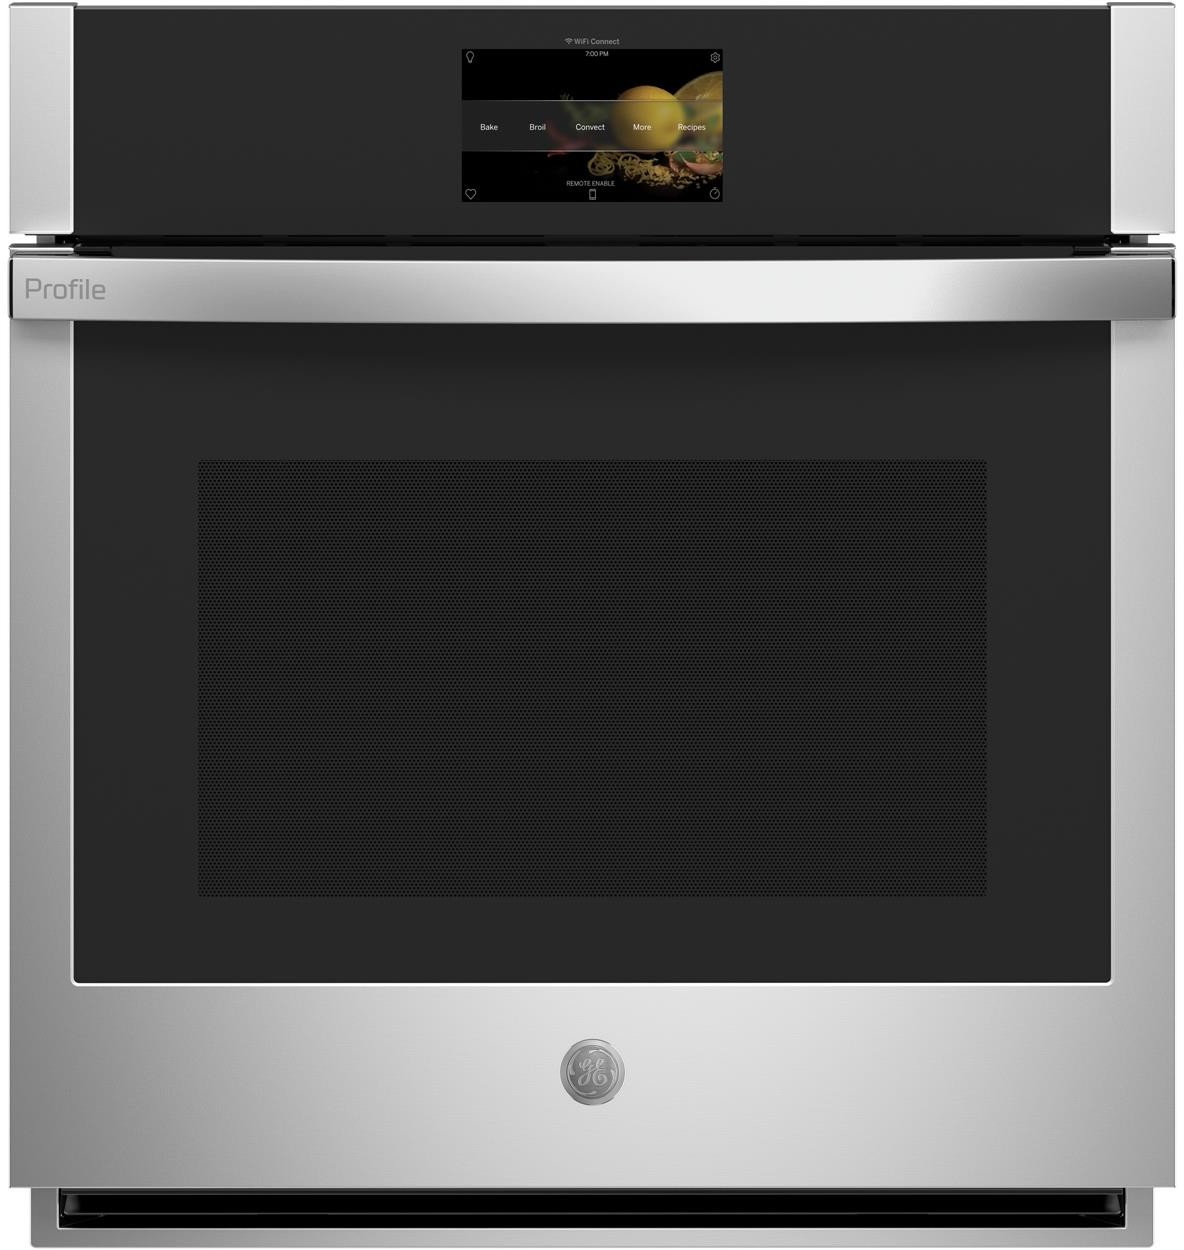 Profile 27"" Single Electric Wall Oven - GE PKS7000SNSS